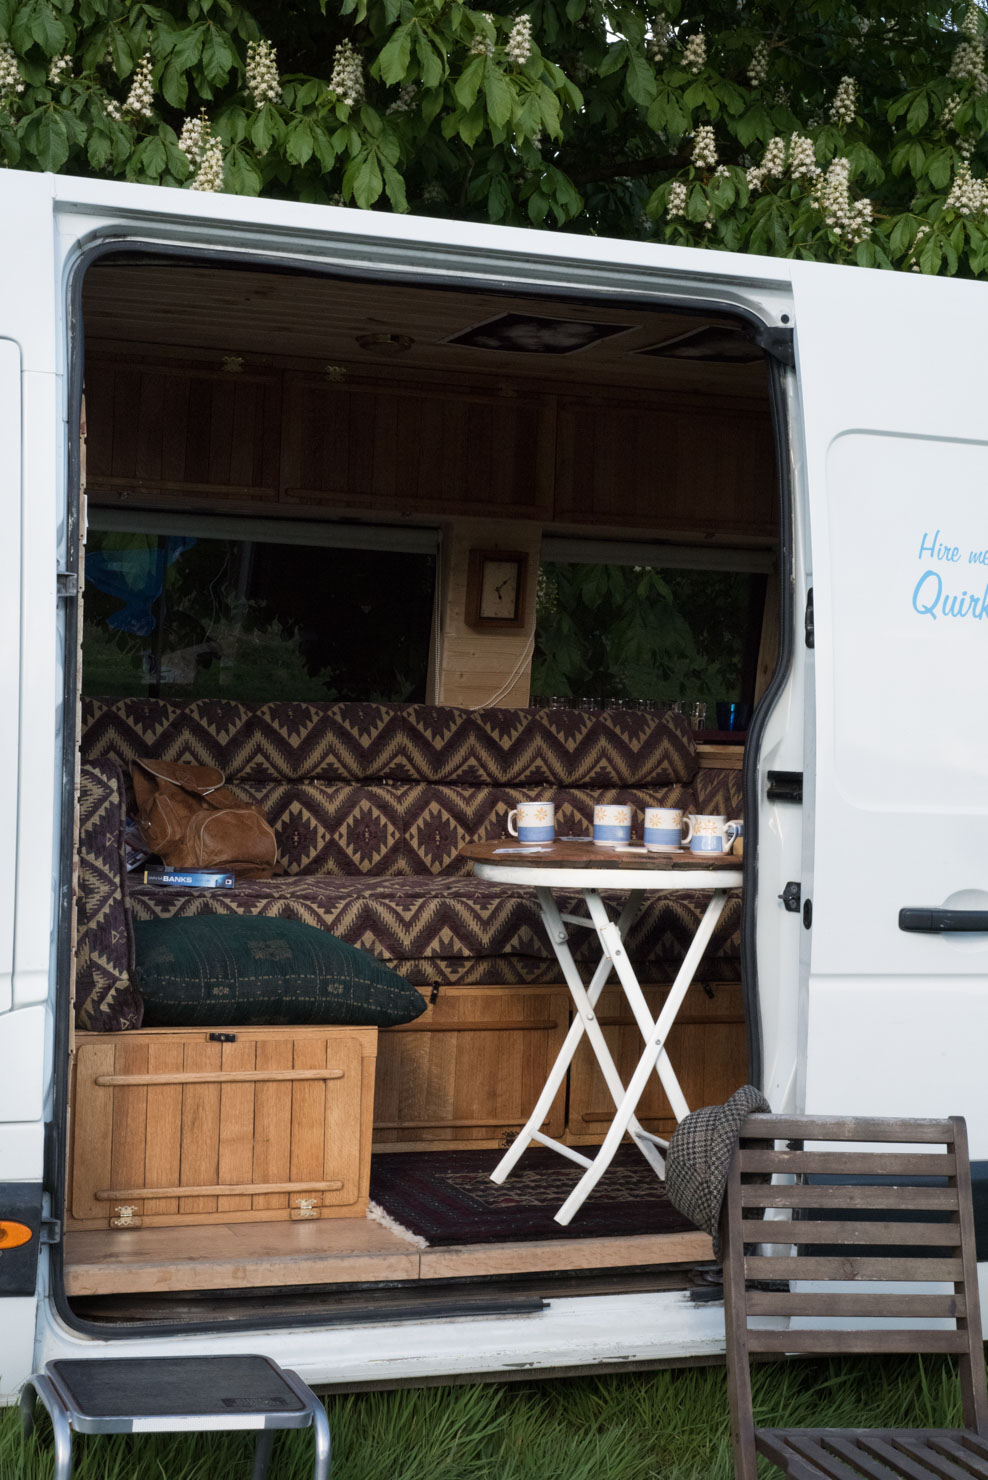 An open white camper van reveals a cozy, rustic interior with wood paneling. Inside, there's a small foldable white table with teacups and plates, a patterned couch with a brown bag on it, and a cushion on a storage box. A folding chair is placed outside near the grassy ground. Trees are visible in the background.